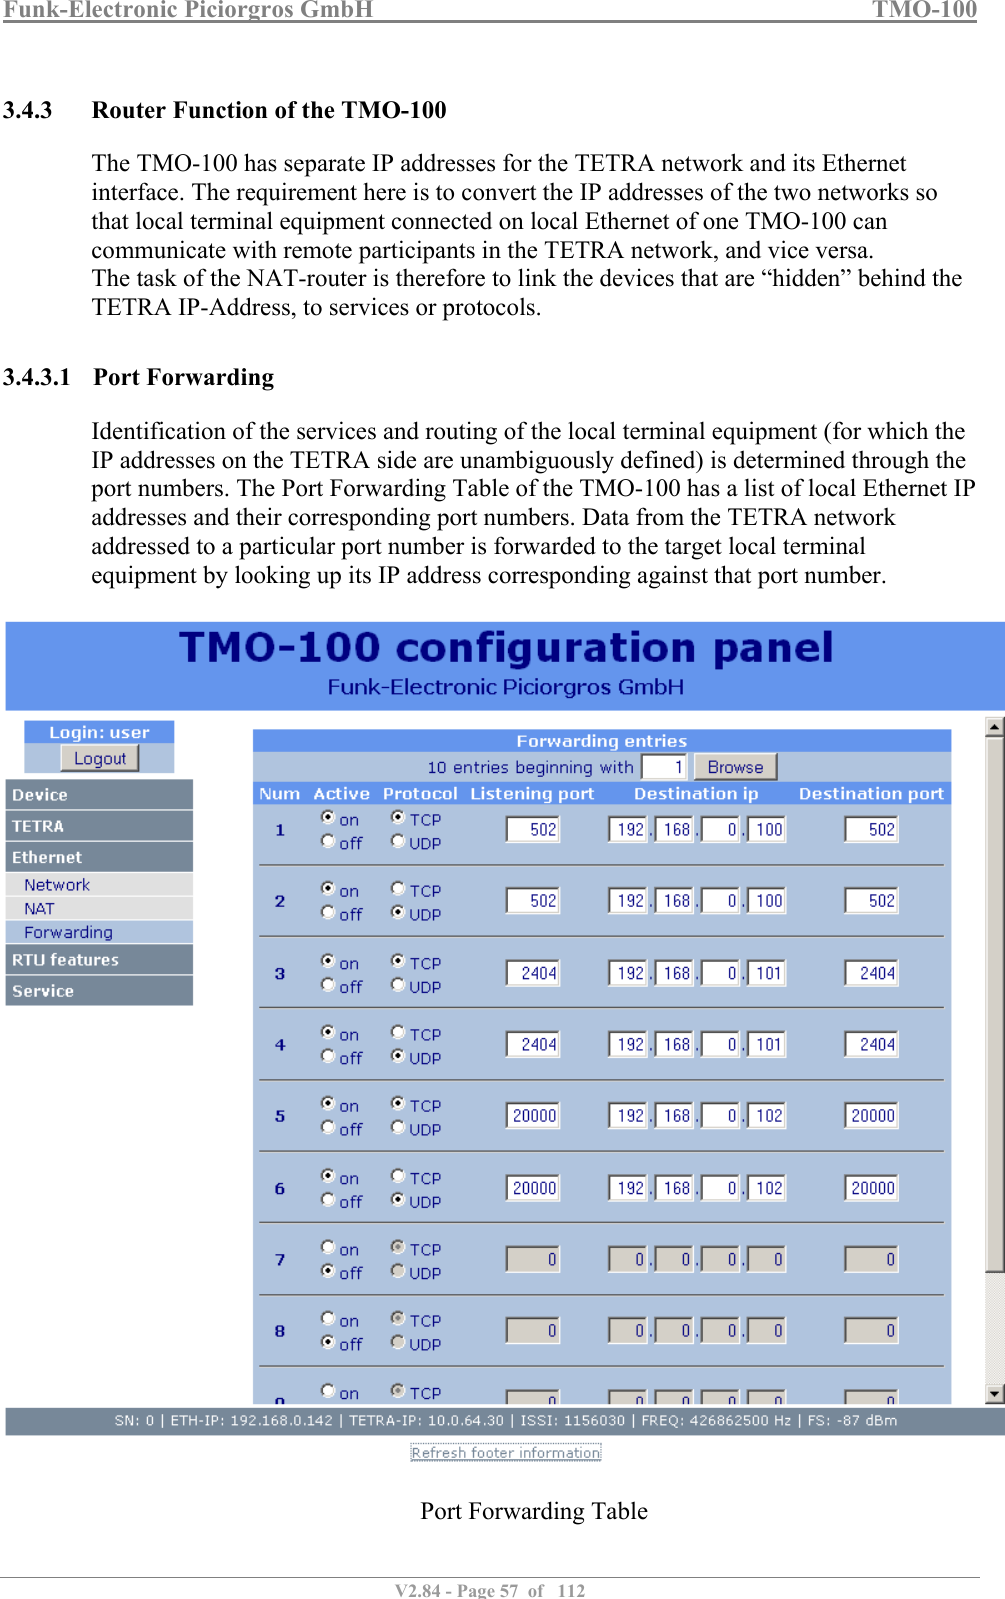 Funk-Electronic Piciorgros GmbH   TMO-100   V2.84 - Page 57  of   112   3.4.3 Router Function of the TMO-100 The TMO-100 has separate IP addresses for the TETRA network and its Ethernet interface. The requirement here is to convert the IP addresses of the two networks so that local terminal equipment connected on local Ethernet of one TMO-100 can communicate with remote participants in the TETRA network, and vice versa.  The task of the NAT-router is therefore to link the devices that are “hidden” behind the TETRA IP-Address, to services or protocols.  3.4.3.1 Port Forwarding Identification of the services and routing of the local terminal equipment (for which the IP addresses on the TETRA side are unambiguously defined) is determined through the port numbers. The Port Forwarding Table of the TMO-100 has a list of local Ethernet IP addresses and their corresponding port numbers. Data from the TETRA network addressed to a particular port number is forwarded to the target local terminal equipment by looking up its IP address corresponding against that port number.    Port Forwarding Table   